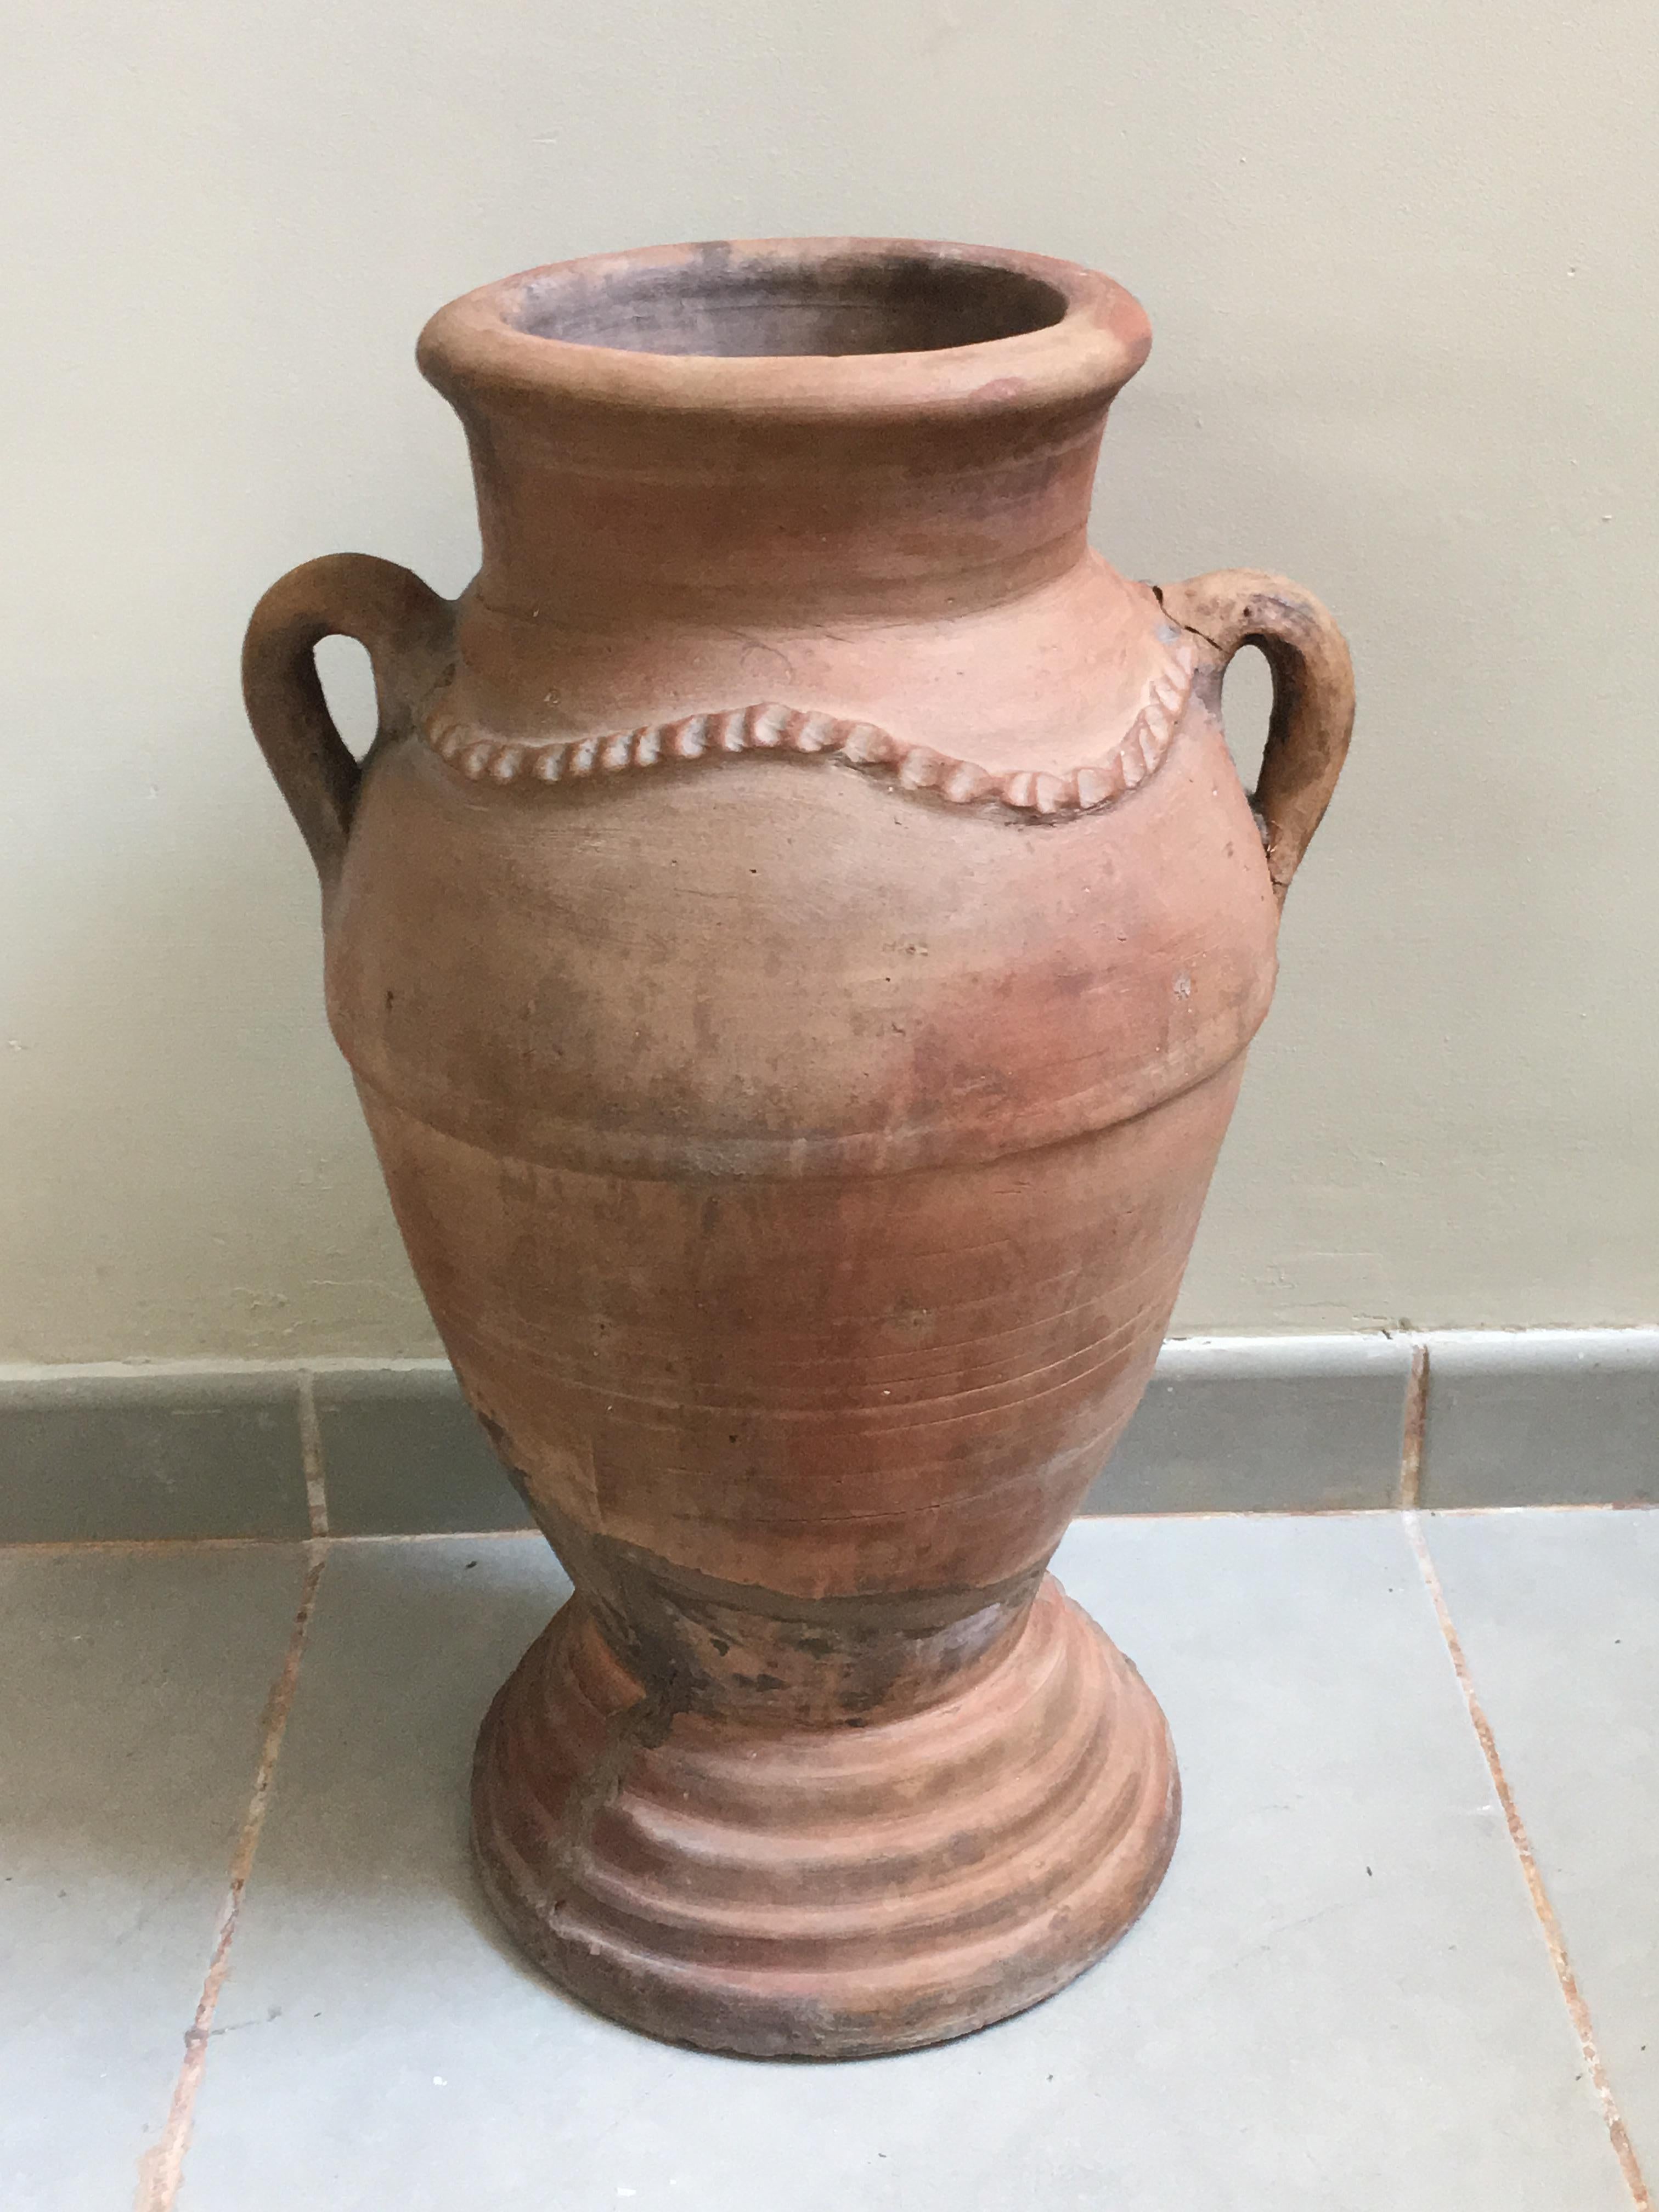 20th century handmade two handled vase, Spain
This impressive late 20th century terracotta water jar was found in Sevilla, Spain.
In excellent condition and great character, featuring the Classic 